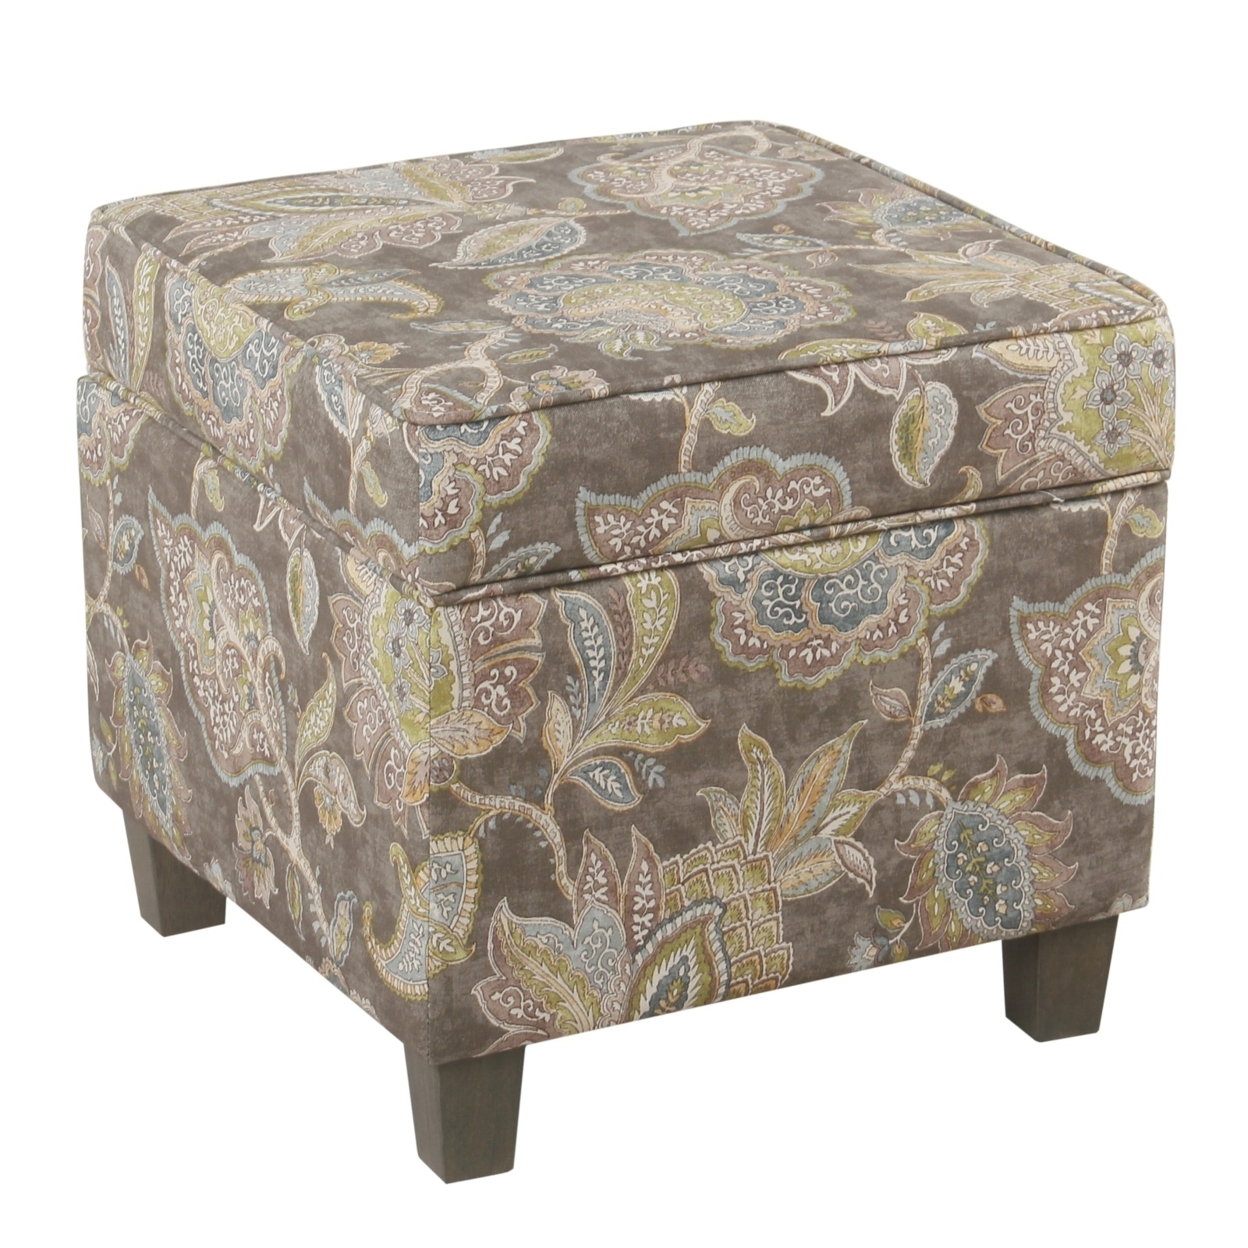 Floral Pattern Fabric Upholstered Wooden Ottoman With Lift Off Top And Tapered Feet, Multicolor- Saltoro Sherpi